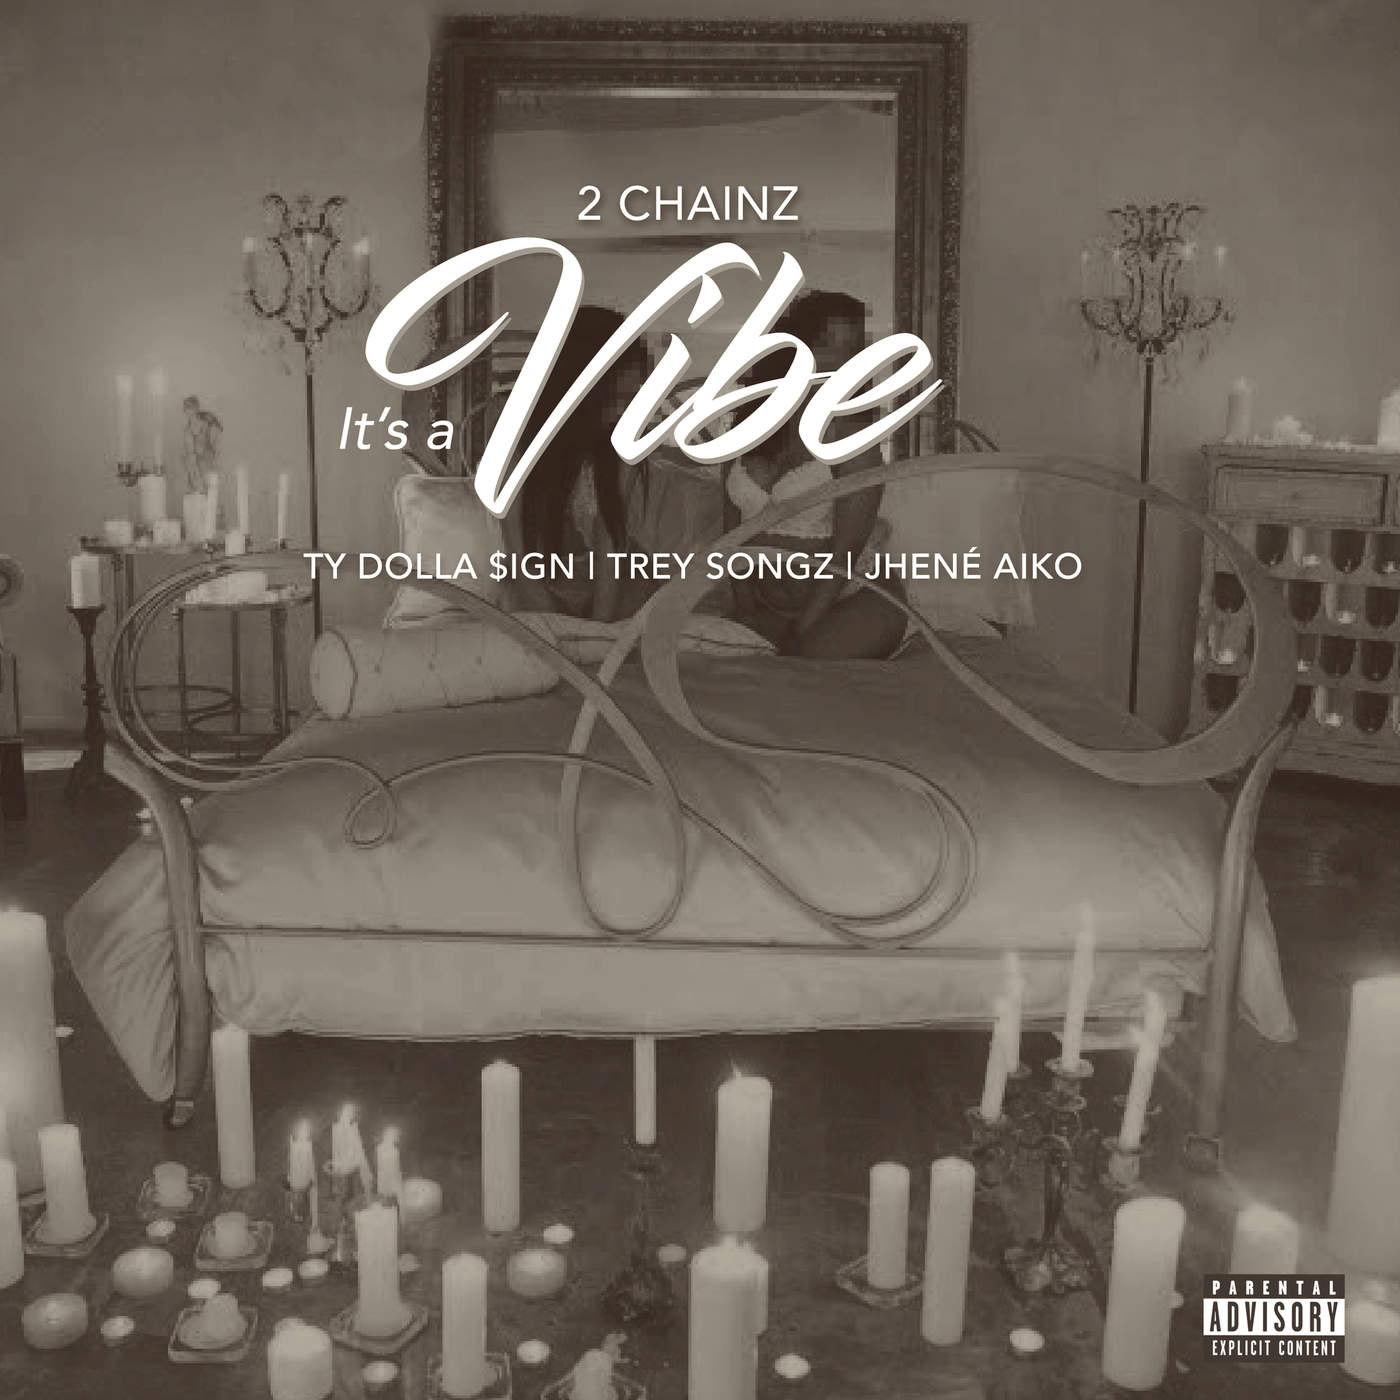 Art for It's a Vibe (feat. Ty Dolla $ign, Trey Songz & Jhené Aiko) by 2 Chainz